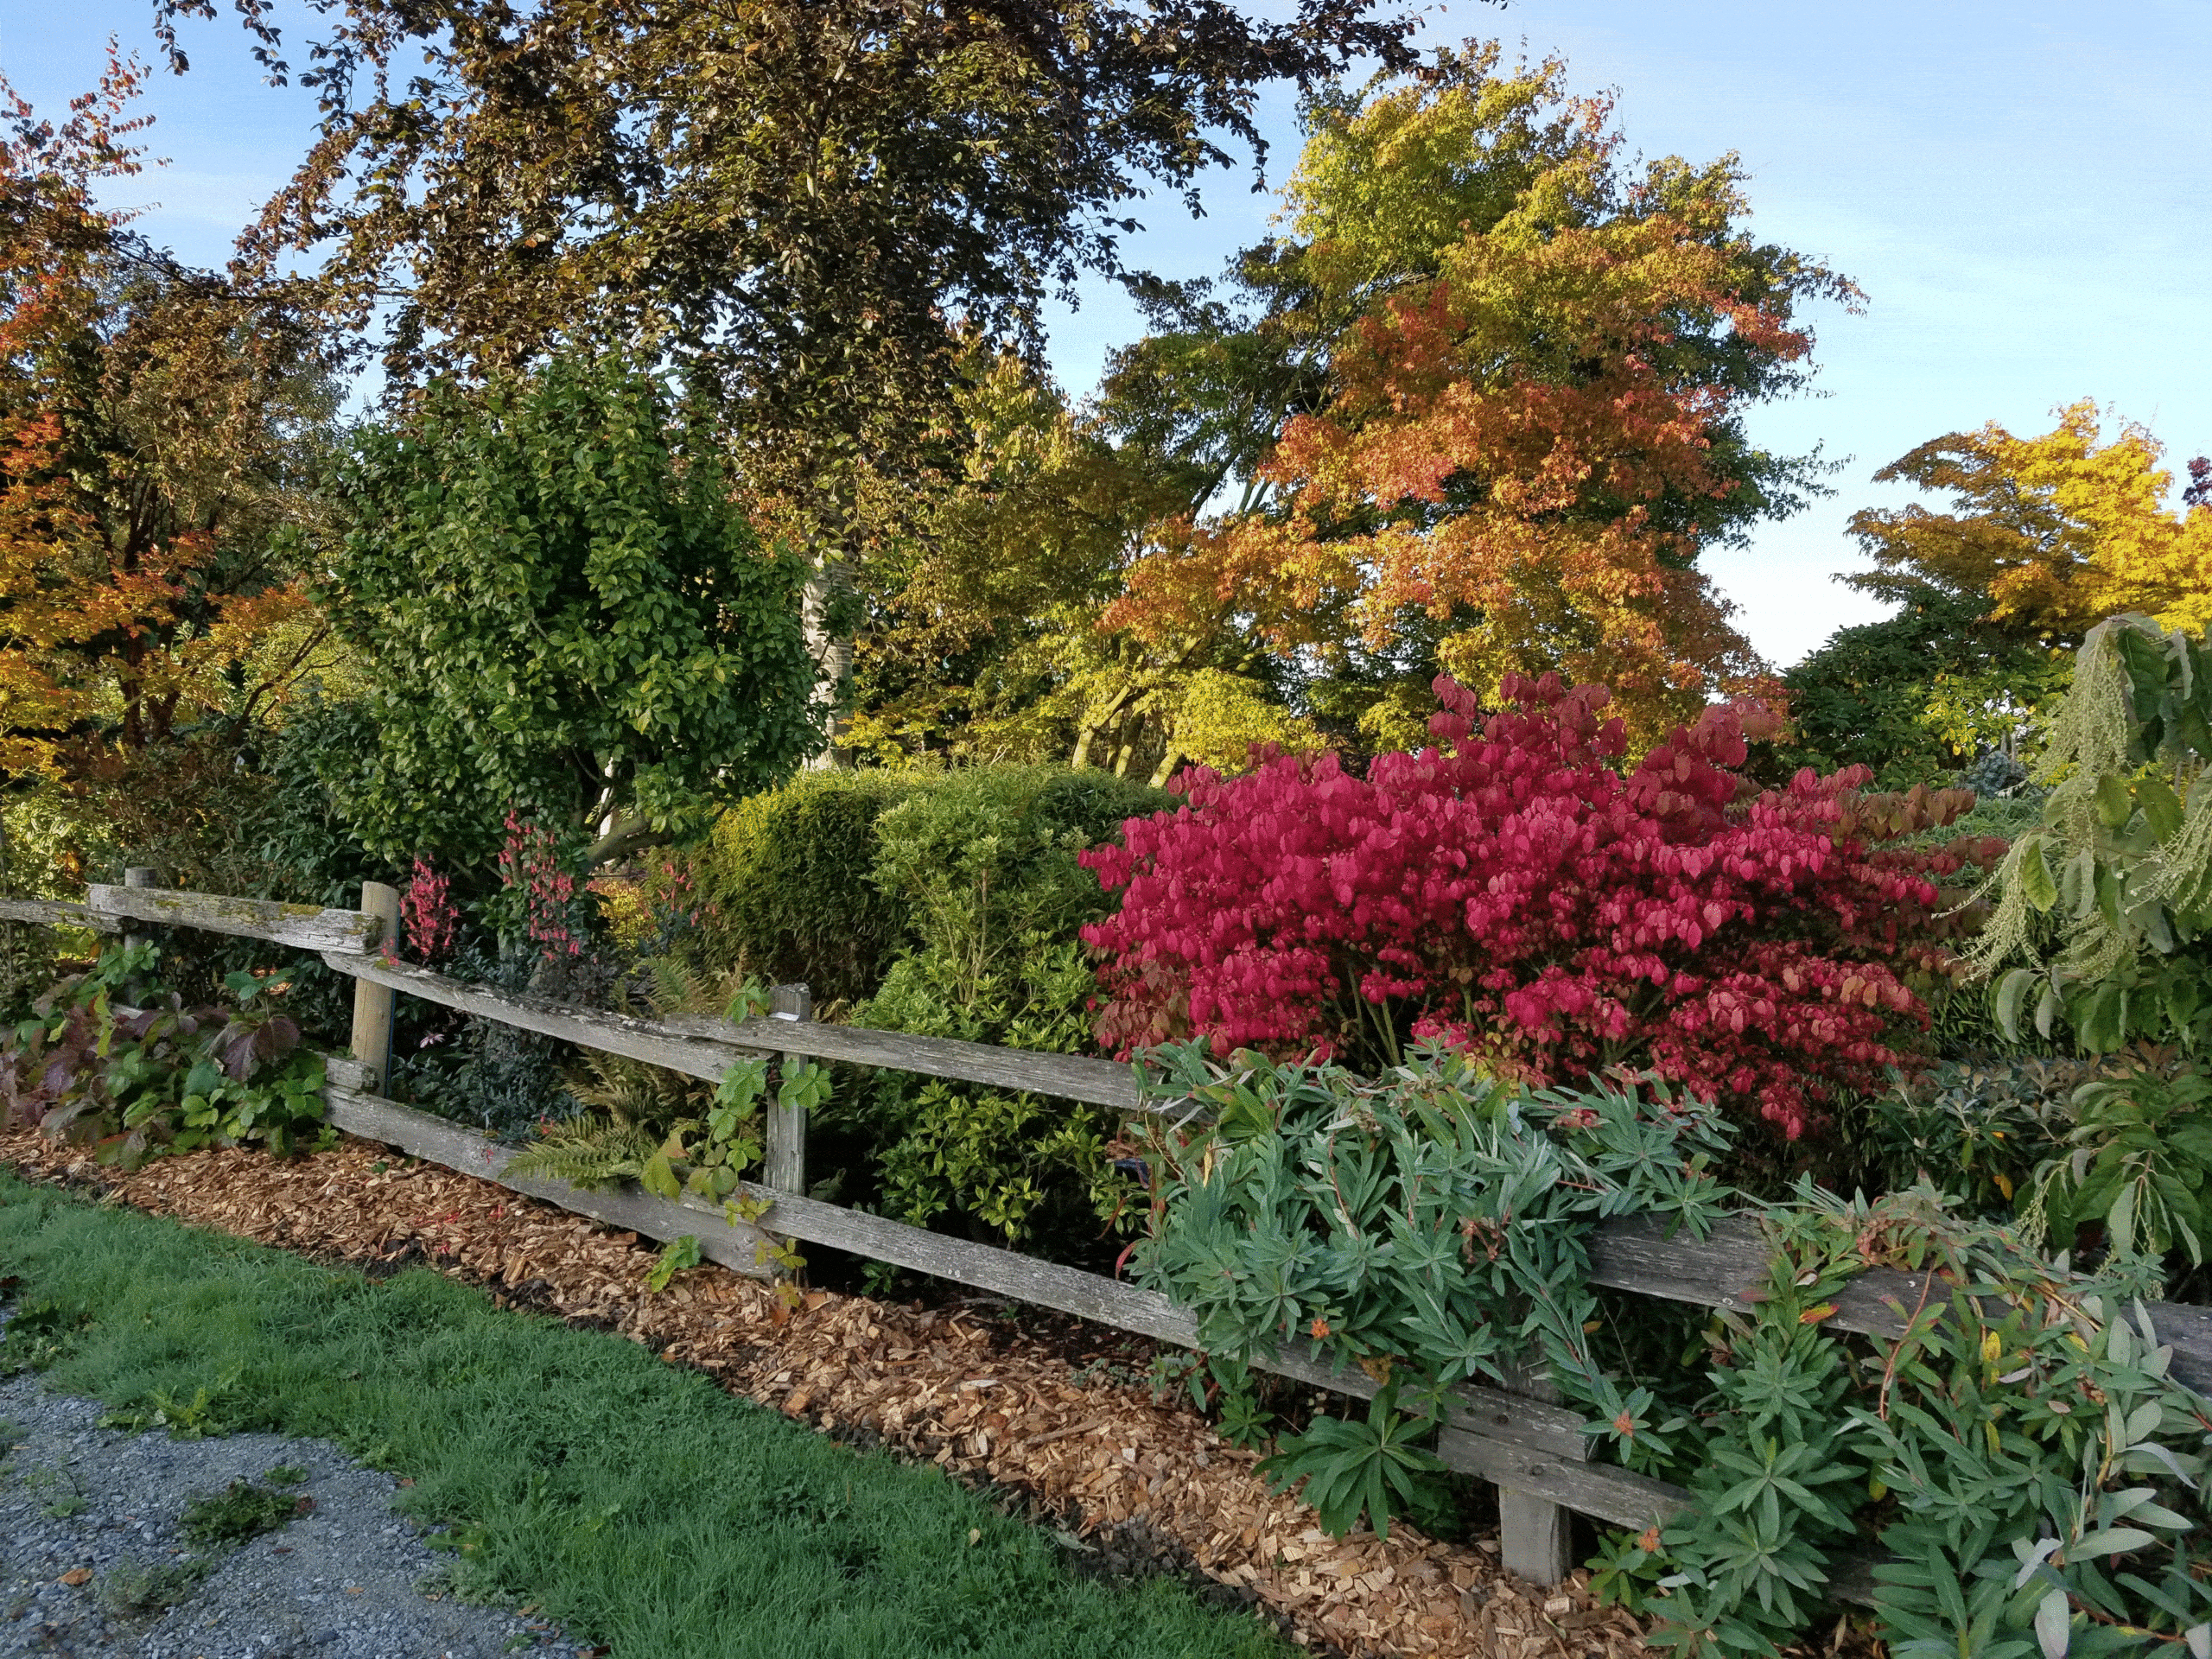 The brilliant red bush is Euonymus alatus "Compactus' commonly known as burning bush. It is at its peak color in this September picture.